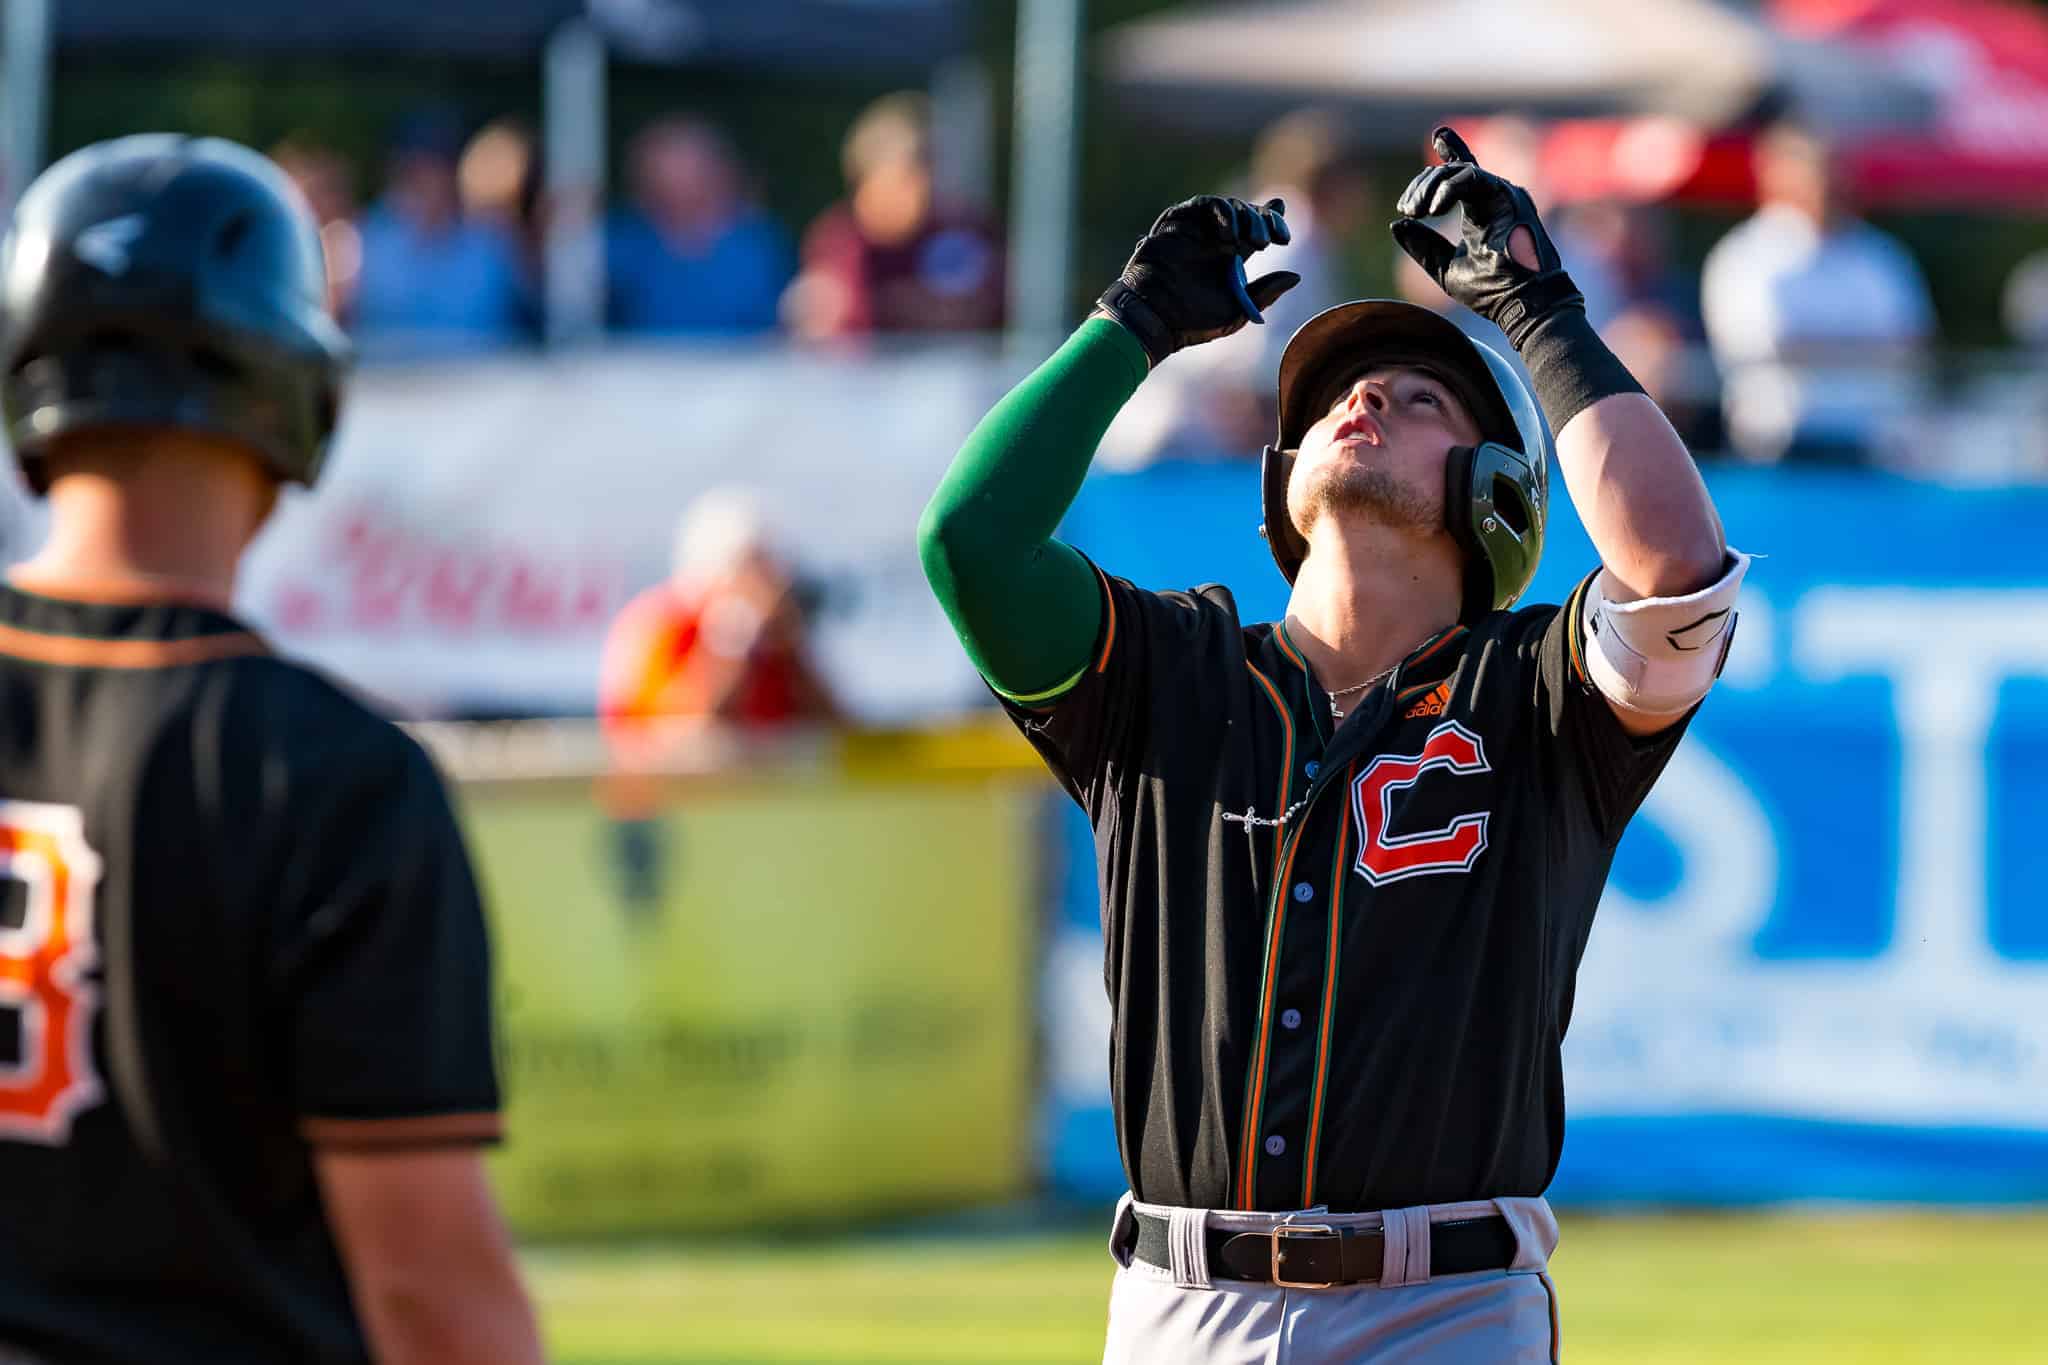 Meidroth's extra inning walk-off hit gives Victoria win over Cowlitz